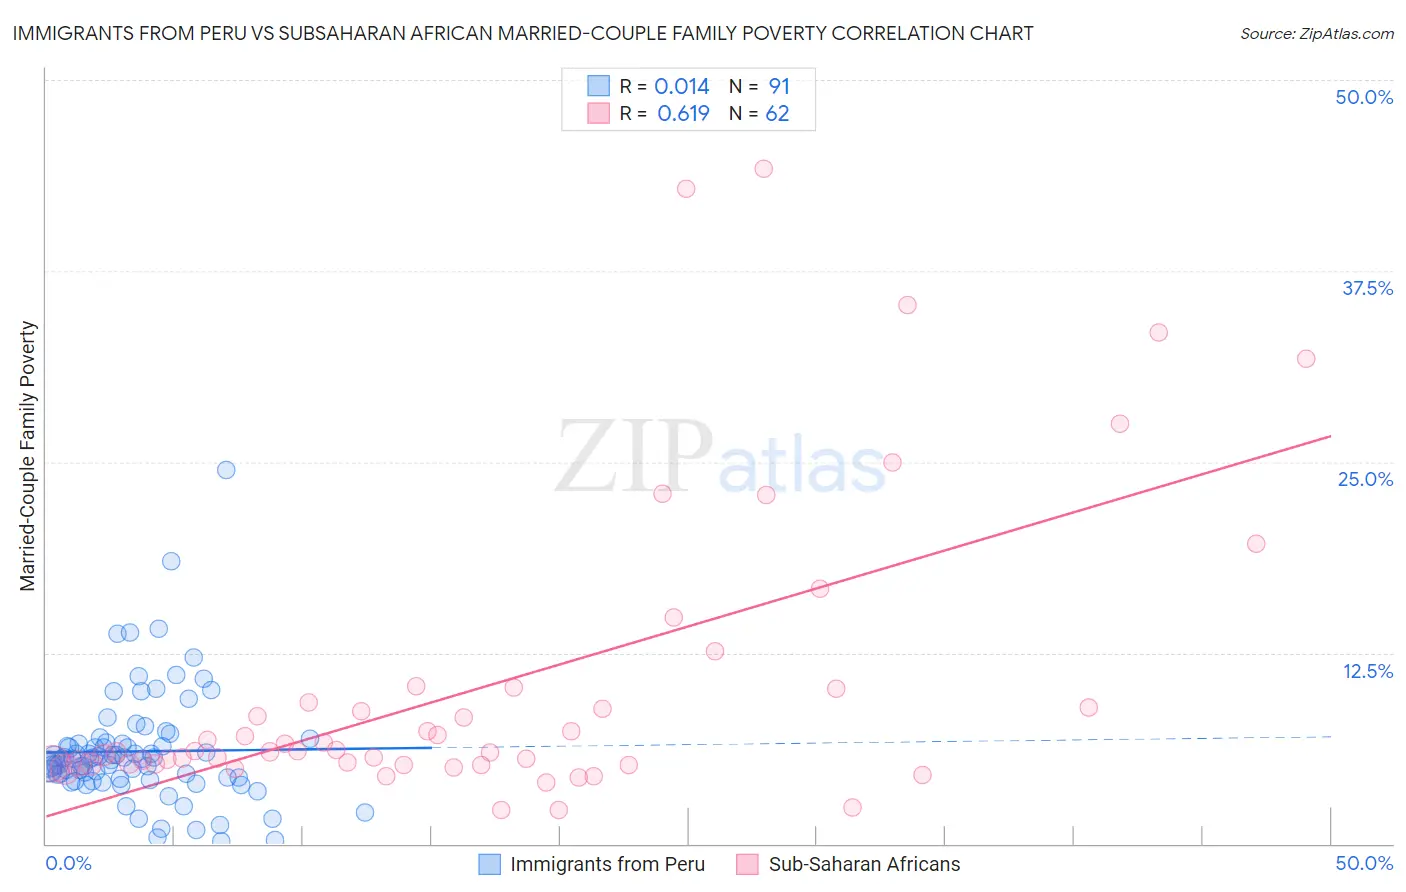 Immigrants from Peru vs Subsaharan African Married-Couple Family Poverty